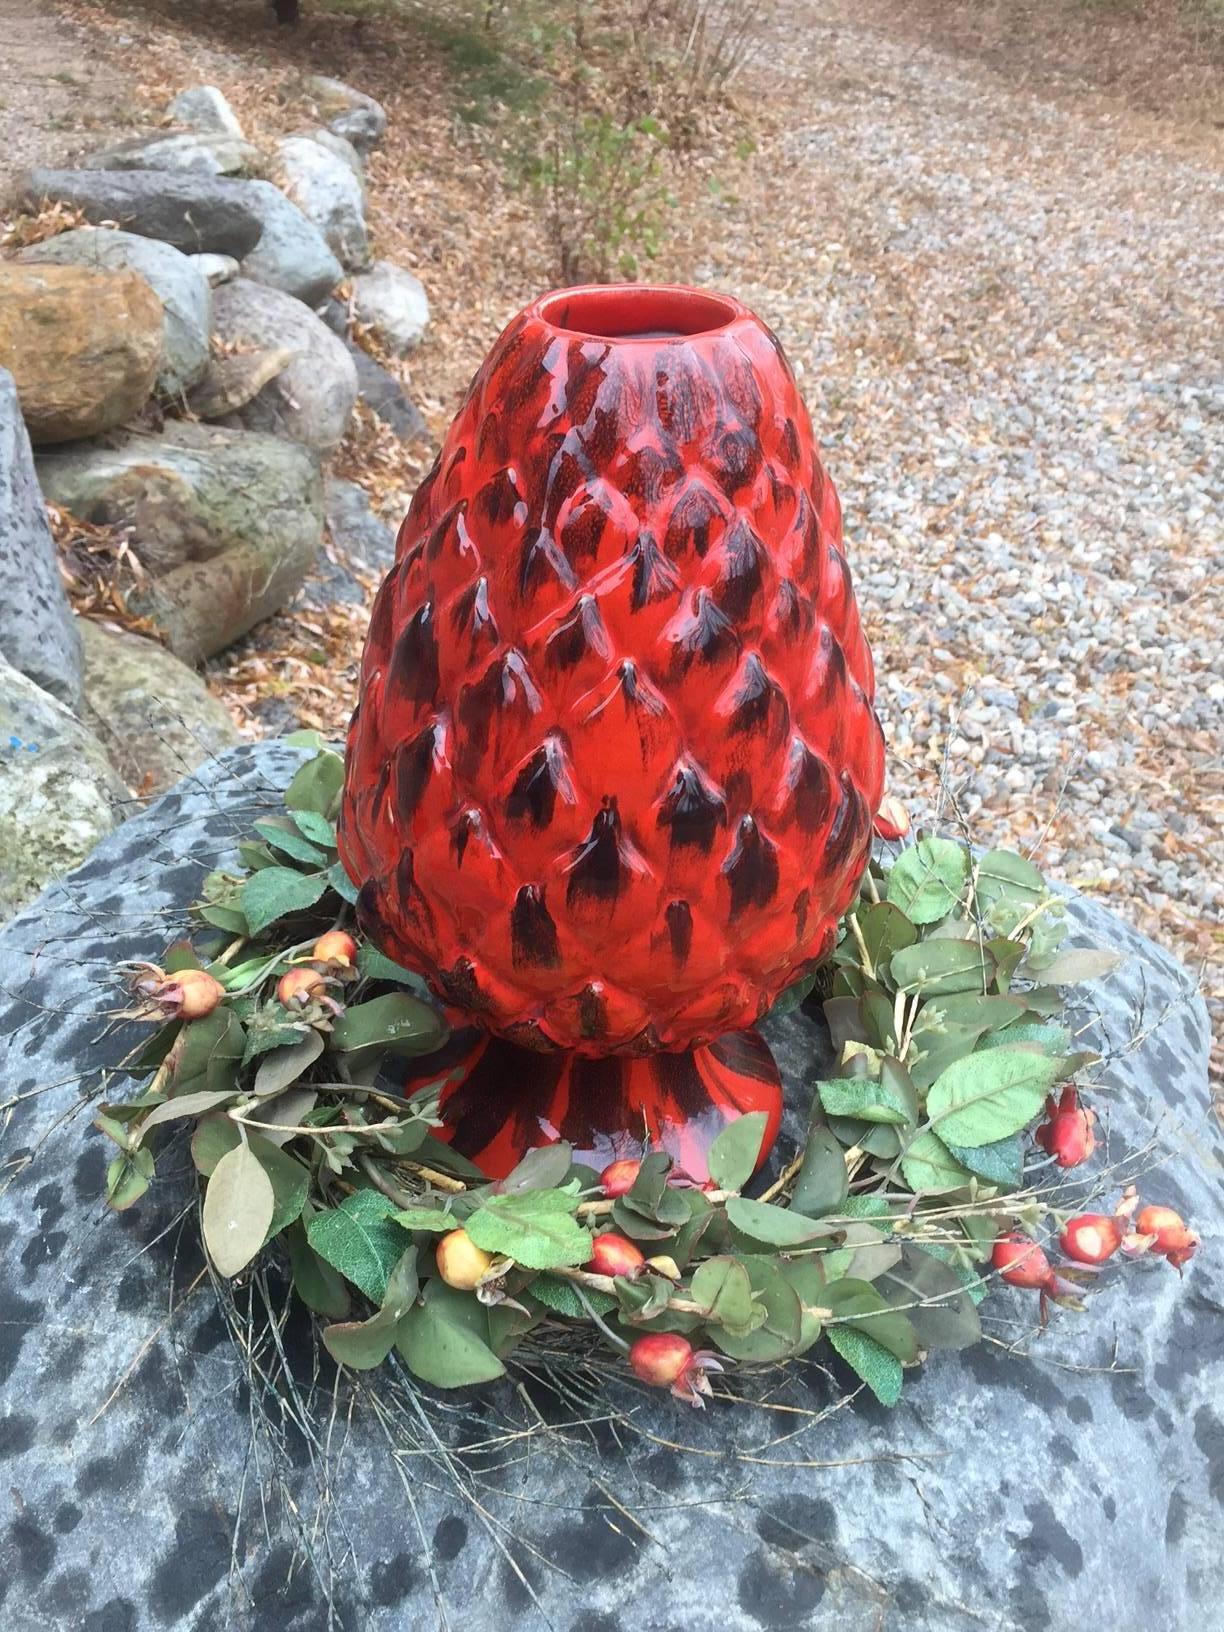 FEBRUARY SALE - NOW SAVE 25% AND MORE

This is a wonderful hand-painted, few of a kind, Mid-Century Modern ceramic pineapple form vase designed by a master designer Zagni from Italy Mid last Century. Exquisite design, lovely vivid colors, good